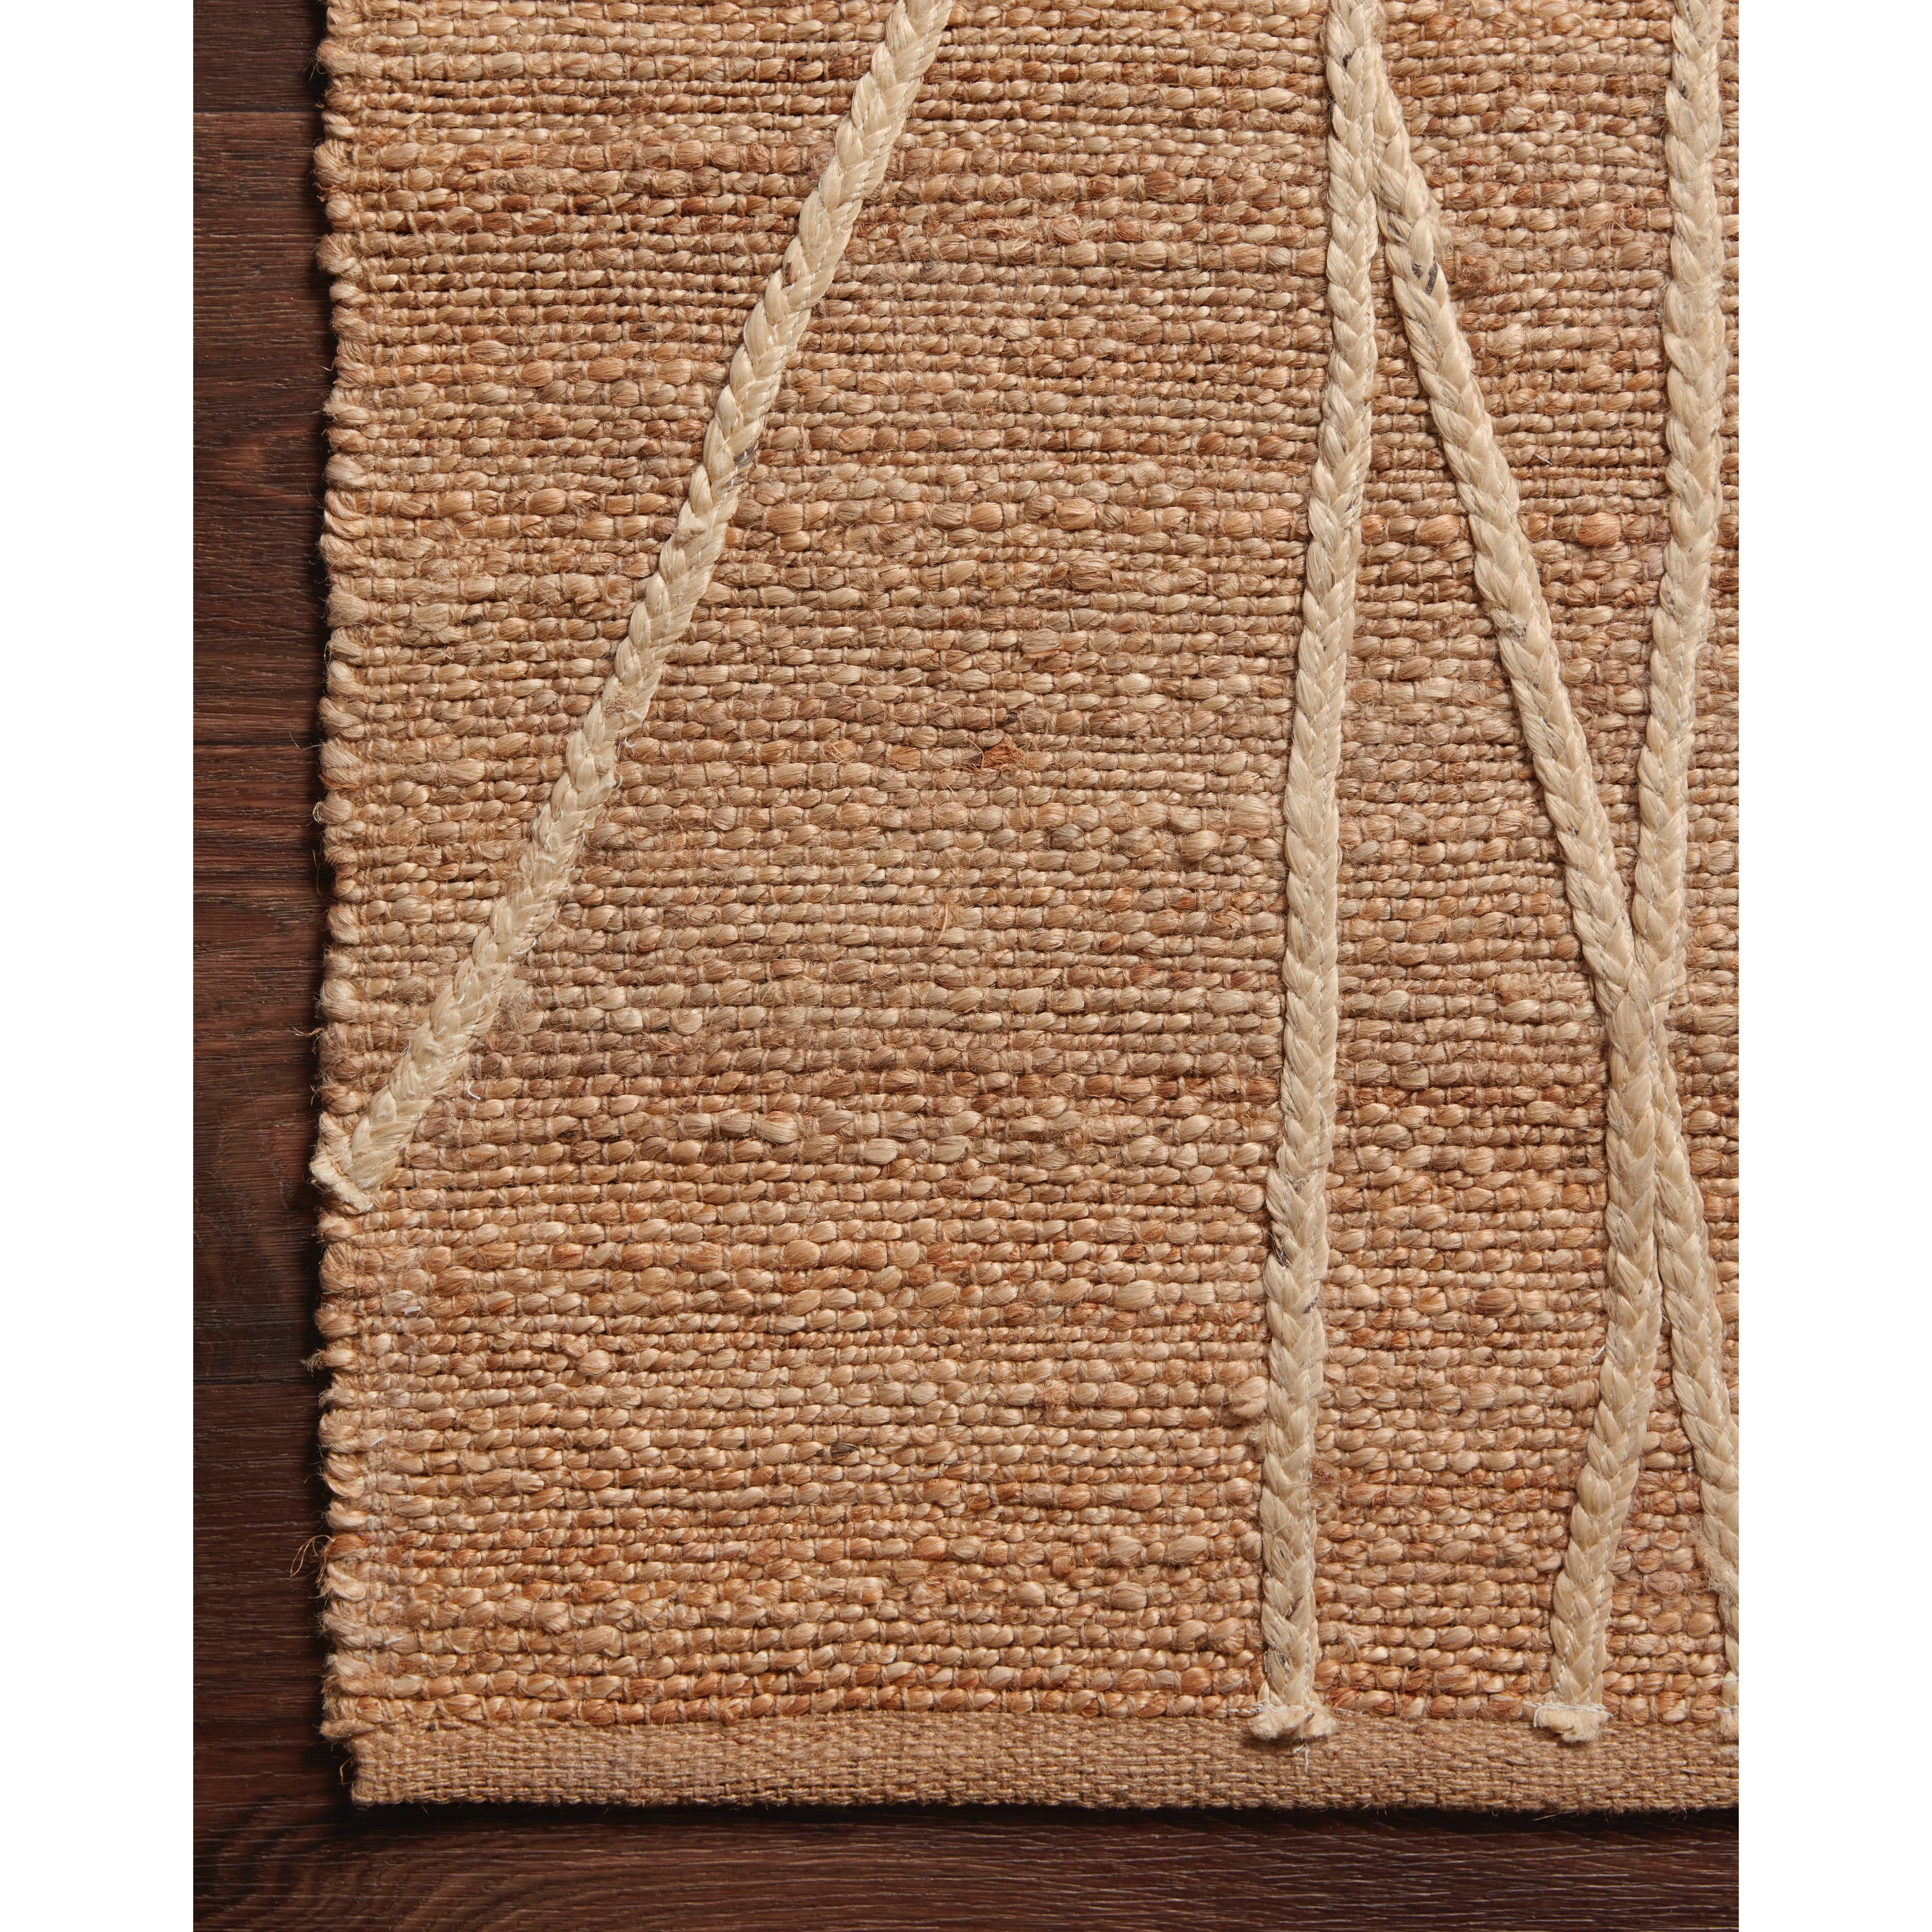 A tonal approach to Moroccan-inspired rugs, the Bodhi Natural / Ivory BOD-03 rug from Loloi is hand-woven of 100% jute. This rug features linear and braided details, creating natural variations that make a subtle yet striking statement for an entryway, living room, hallway or kitchen runner, or dining room. Amethyst Home provides interior design, new construction, custom furniture, and rugs for the Winter Park, Winter Garden, and Orlando, Florida metro area.